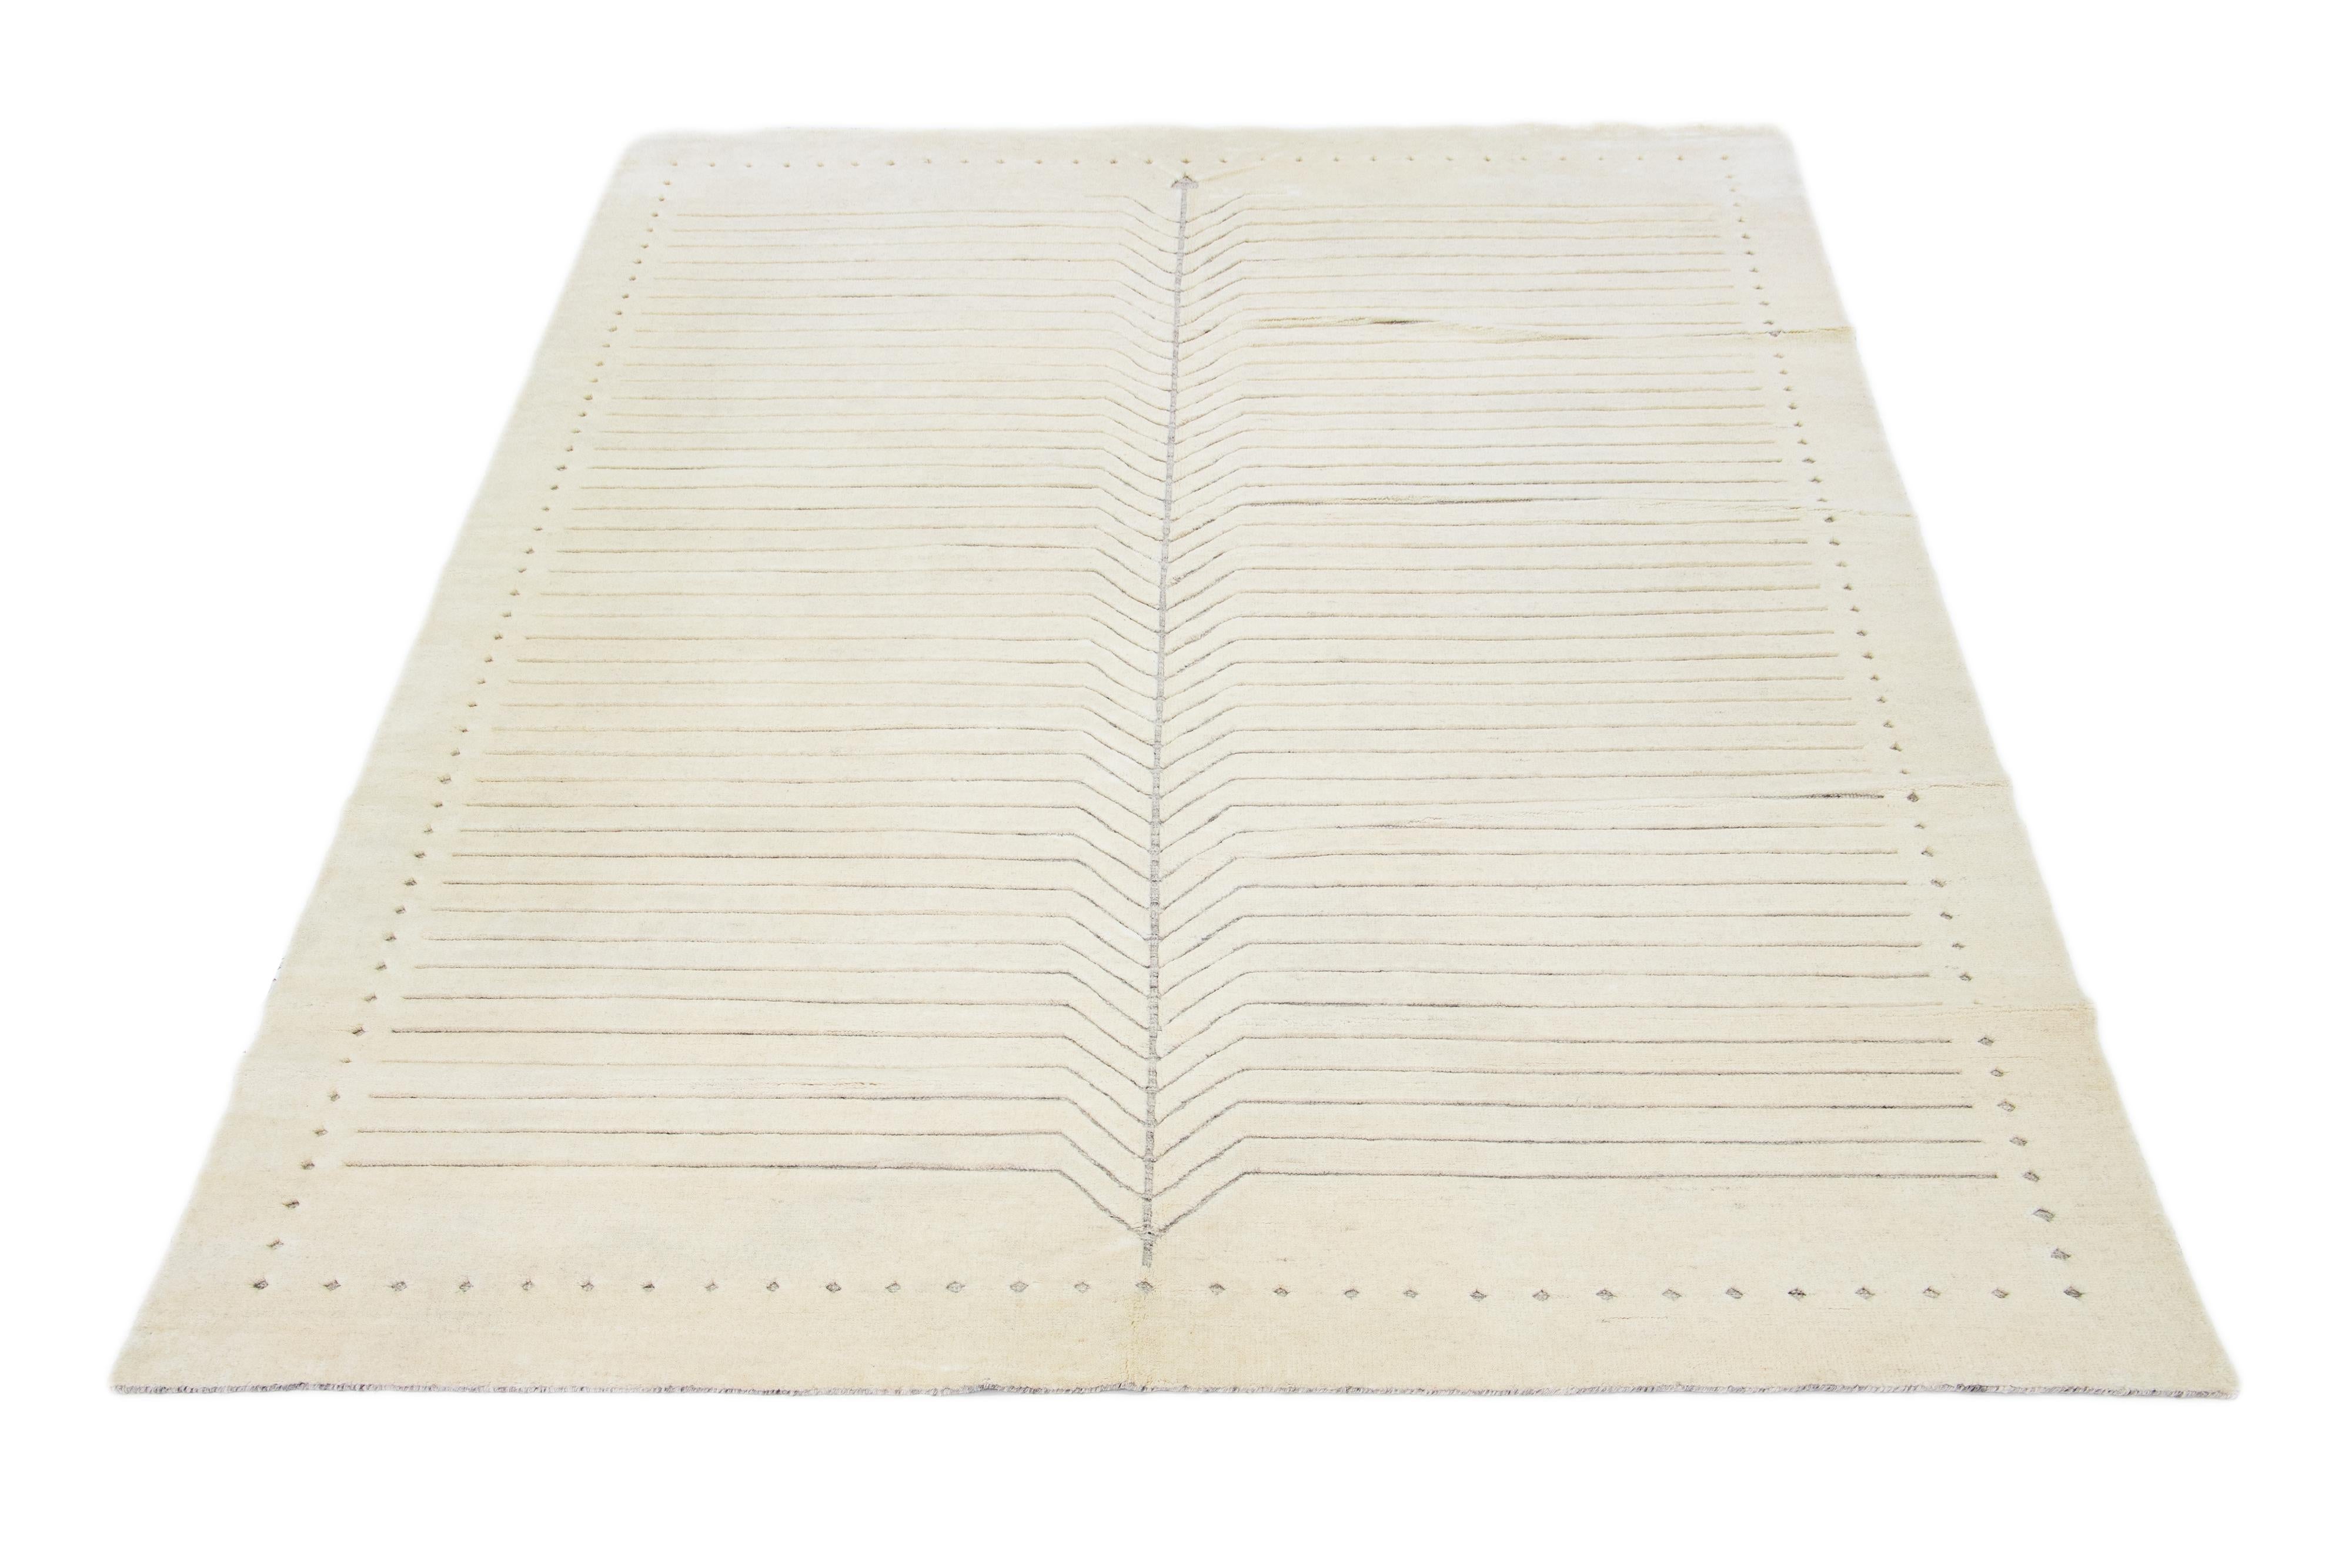 Exquisitely crafted by hand, this modern Moroccan rug features a luxuriously minimalist gray design in the most elegant ivories.

This rug measures 10' x 14'.